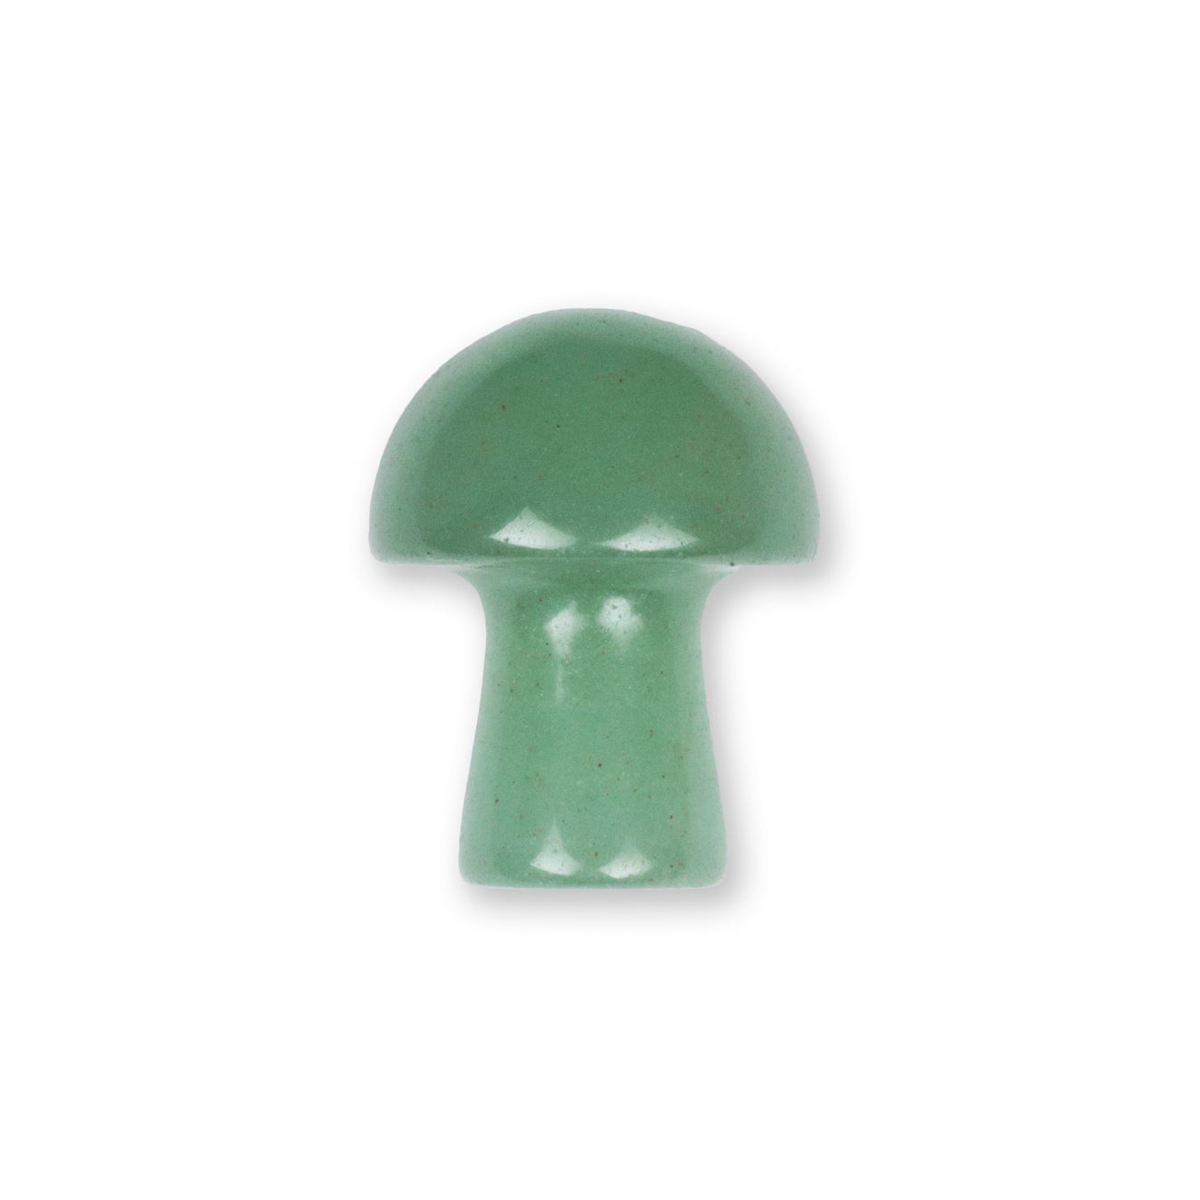 a green mushroom shaped object on a white background